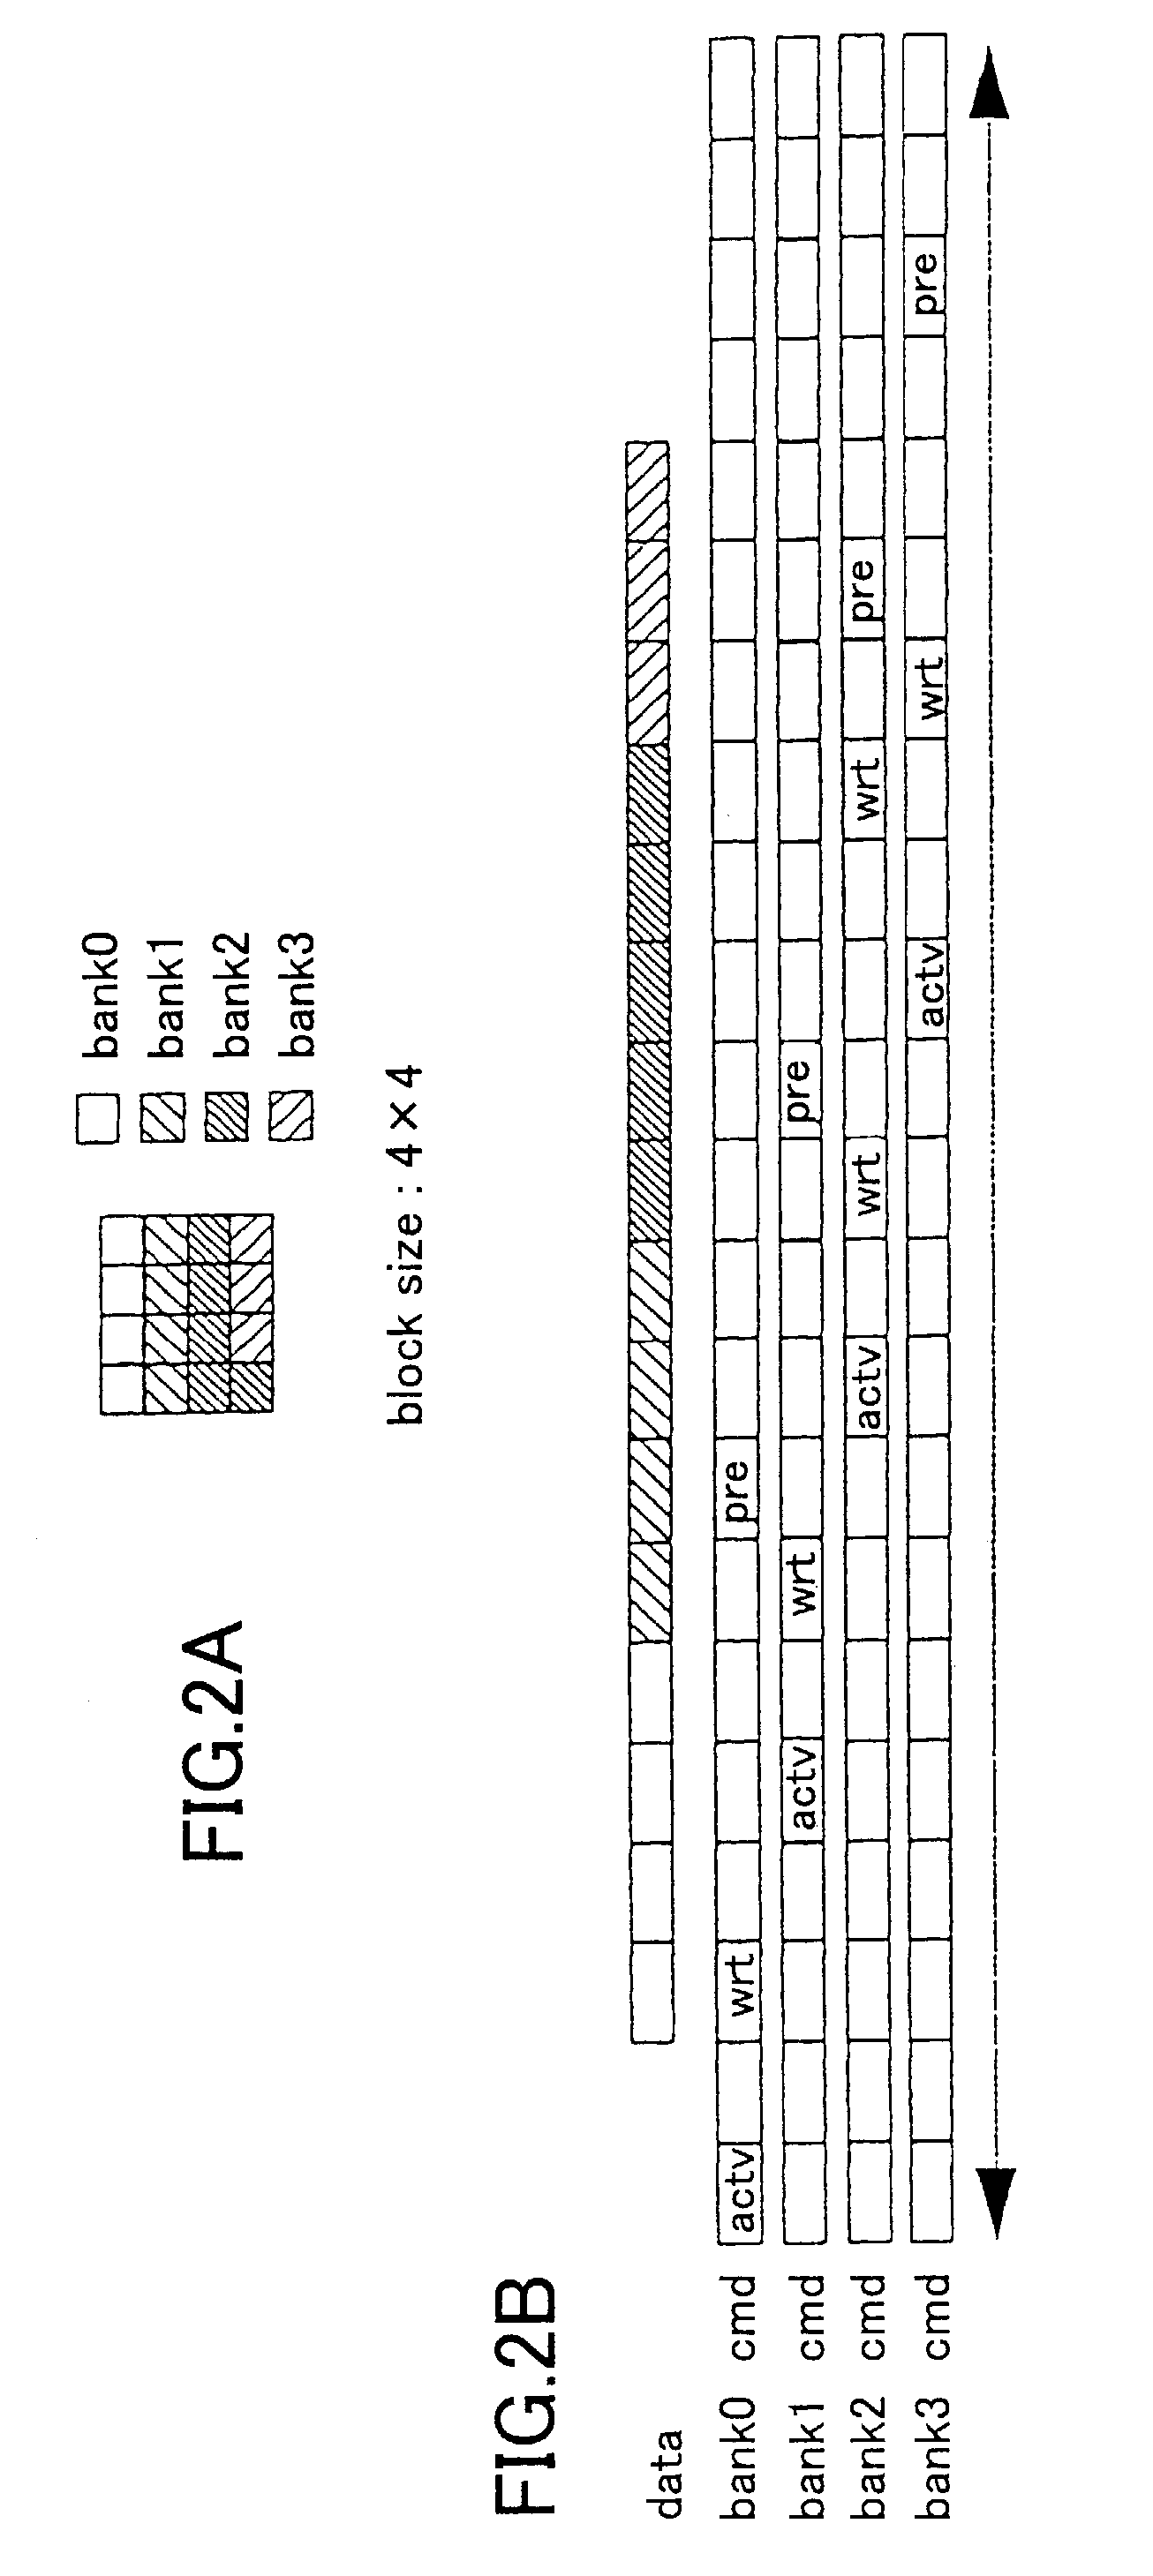 Clock control apparatus and method, for a memory controller, that processes a block access into single continuous macro access while minimizing power consumption